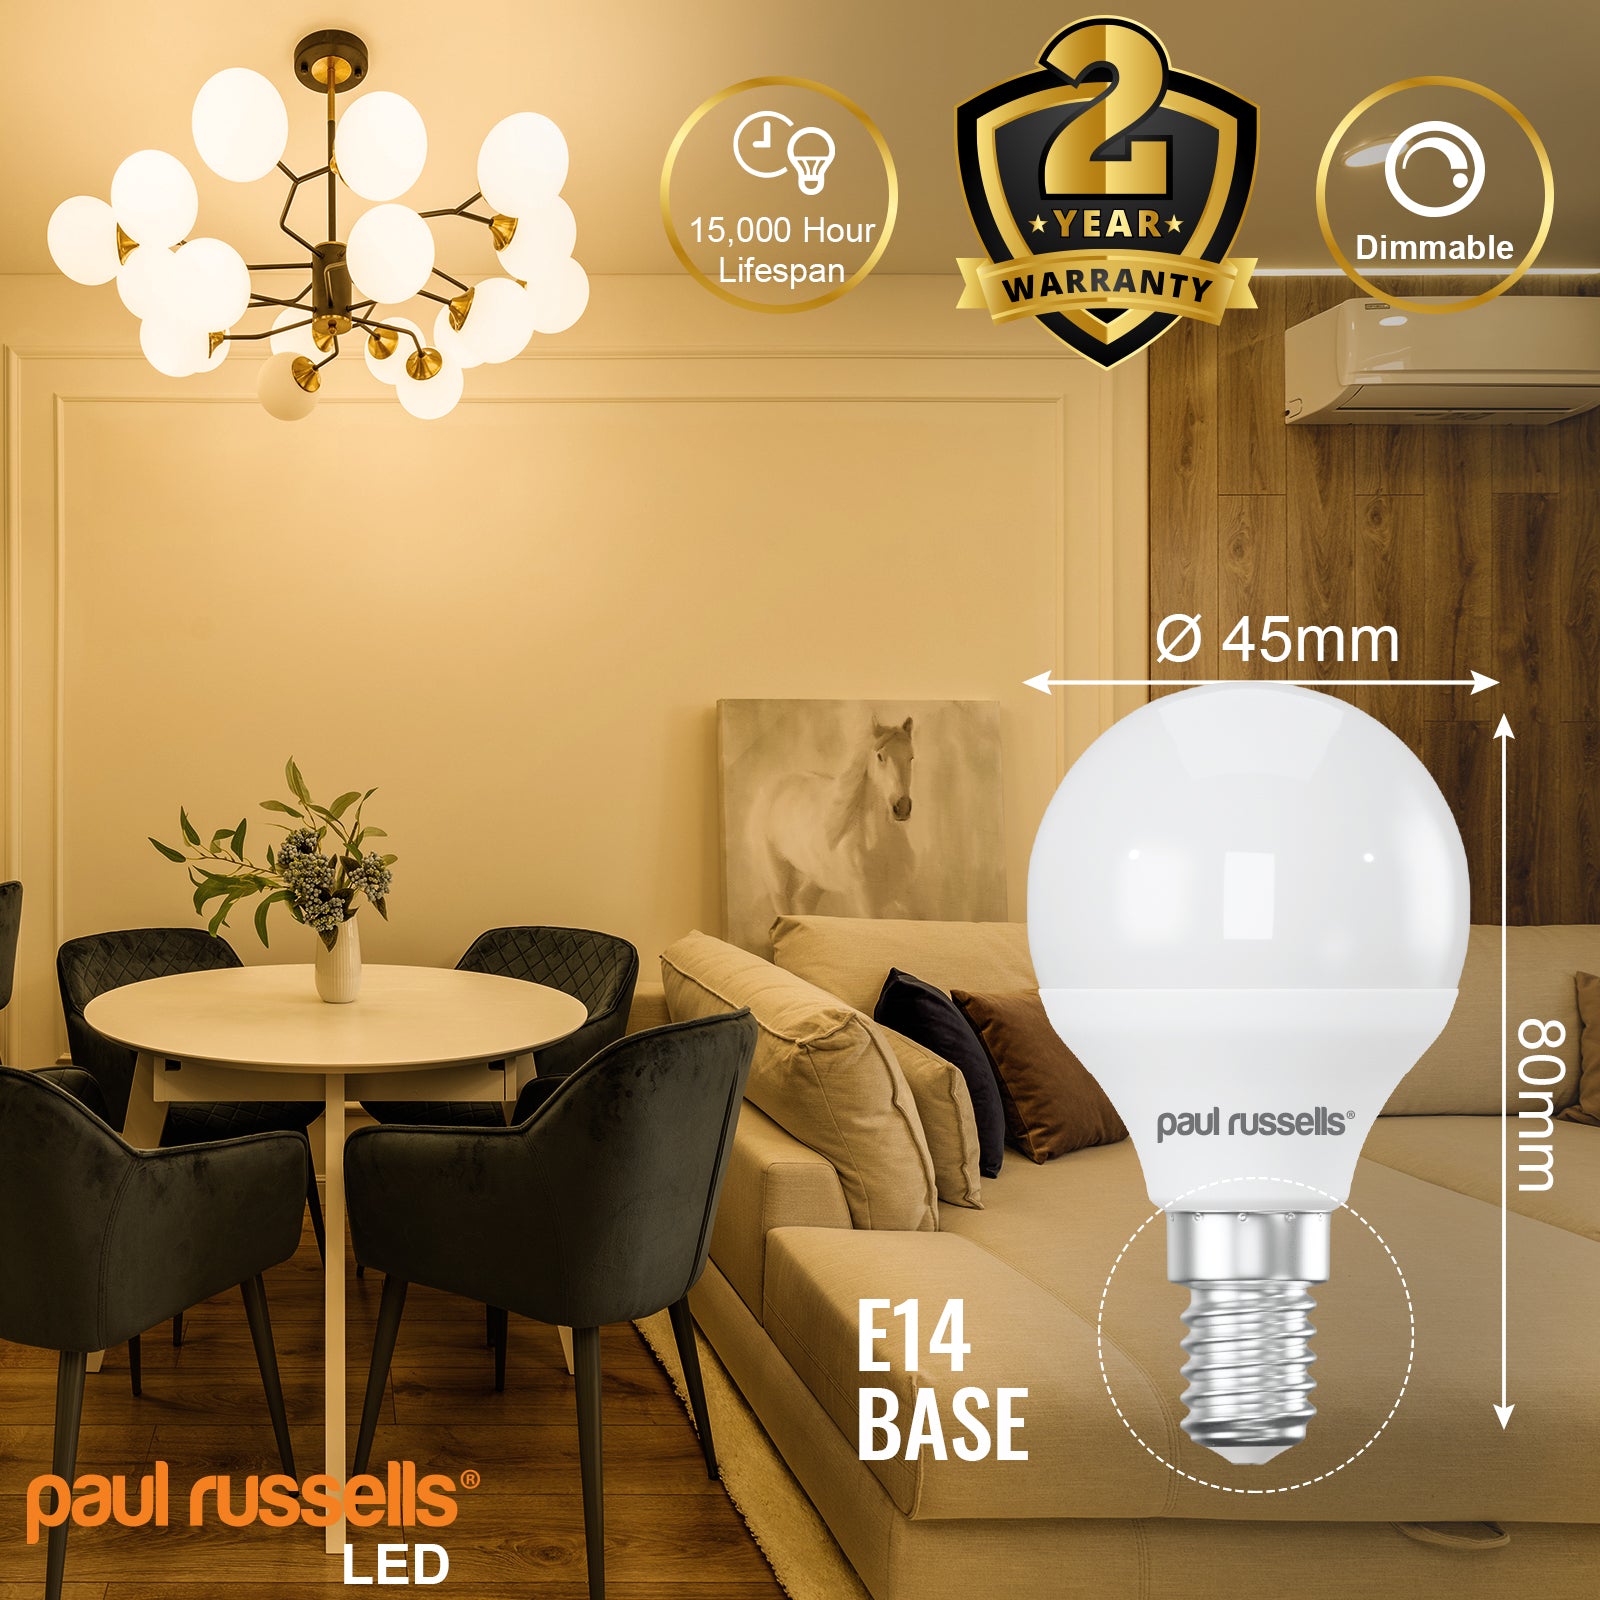 LED Dimmable Golf 5.5W=40W Warm White Small Edison Screw SES E14 Bulbs